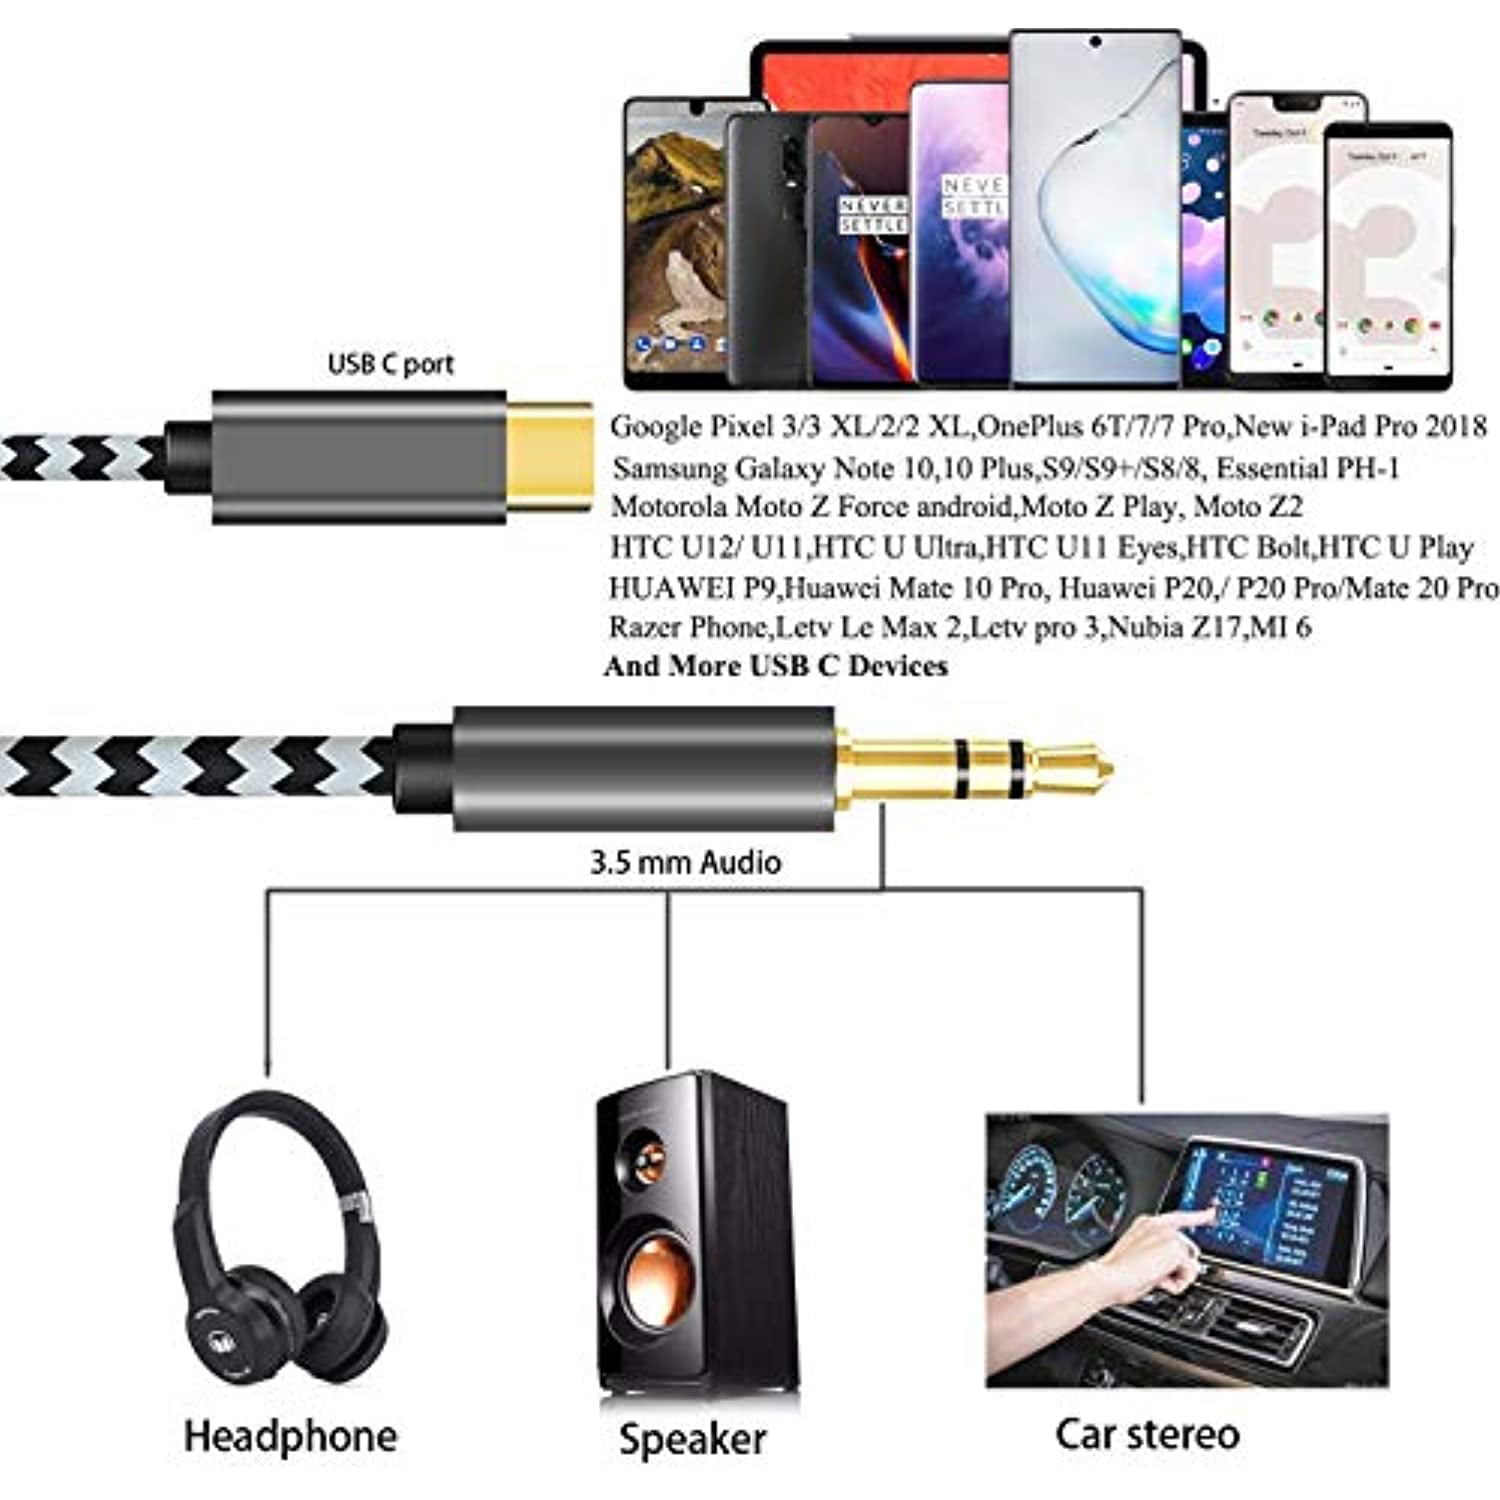 Zebra Drift USB C Male to 3.5mm Male Extension Headphone Audio Stereo Cord Car Aux Cable Compatible Google Pixel 4/3 XL/2/ 2XL Galaxy Note 10/10+ More Type C to 3.5mm Audio Aux Jack Adapter 